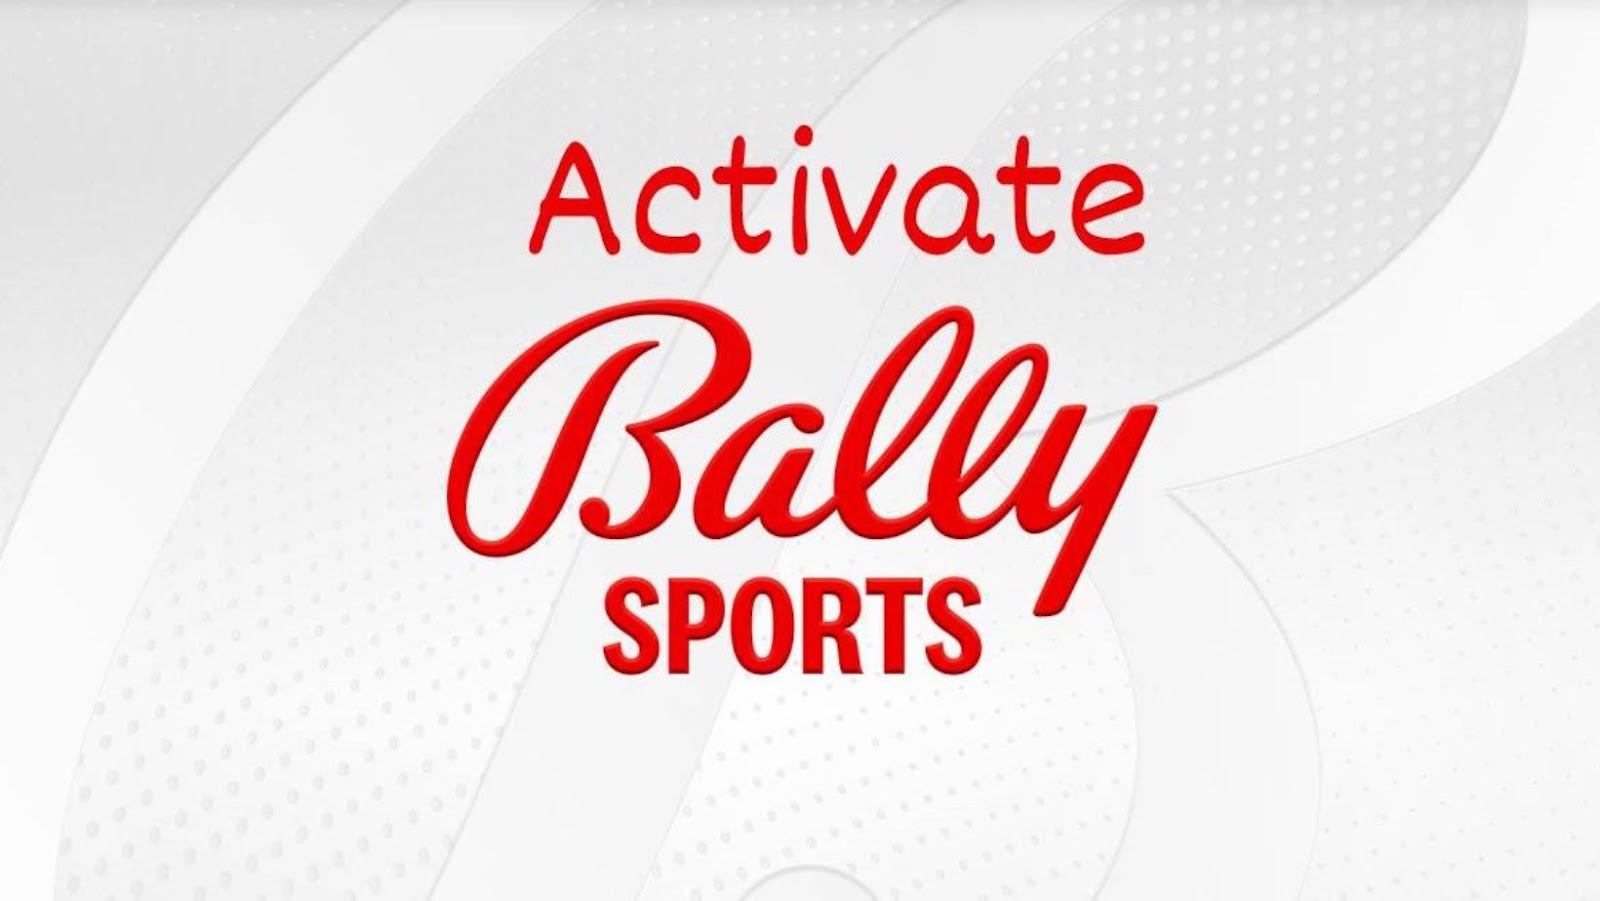 www.ballysports/activate: A Hassle Free Acount Activation Guide - From ...